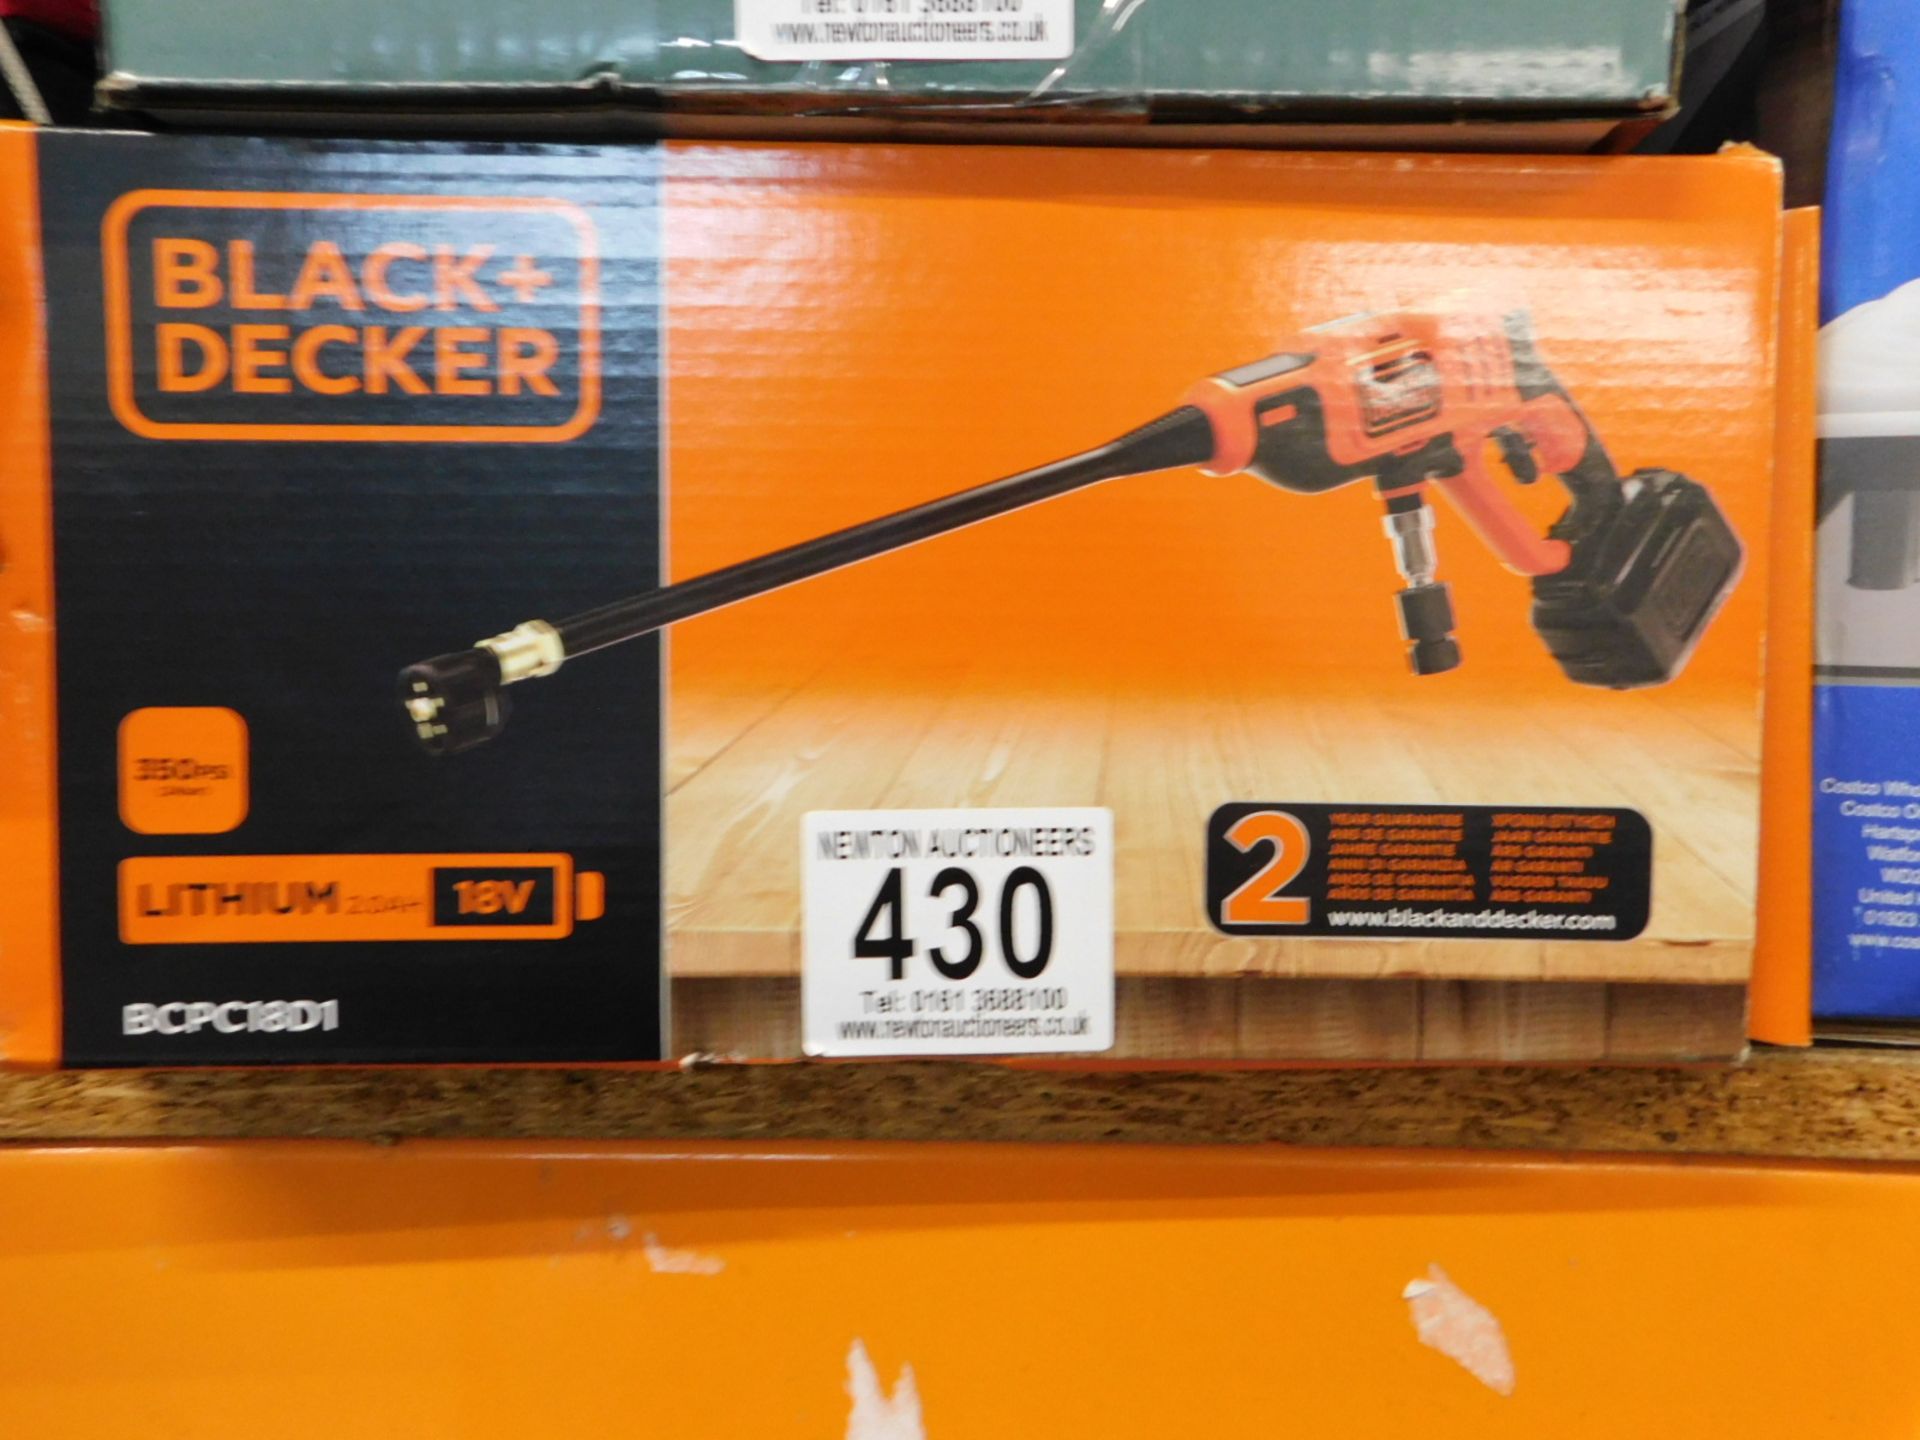 1 BOXED BLACK+DECKER 18V PRESSURE CLEANER WITH 2AH BATTERY & 1A CHARGER RRP Â£149